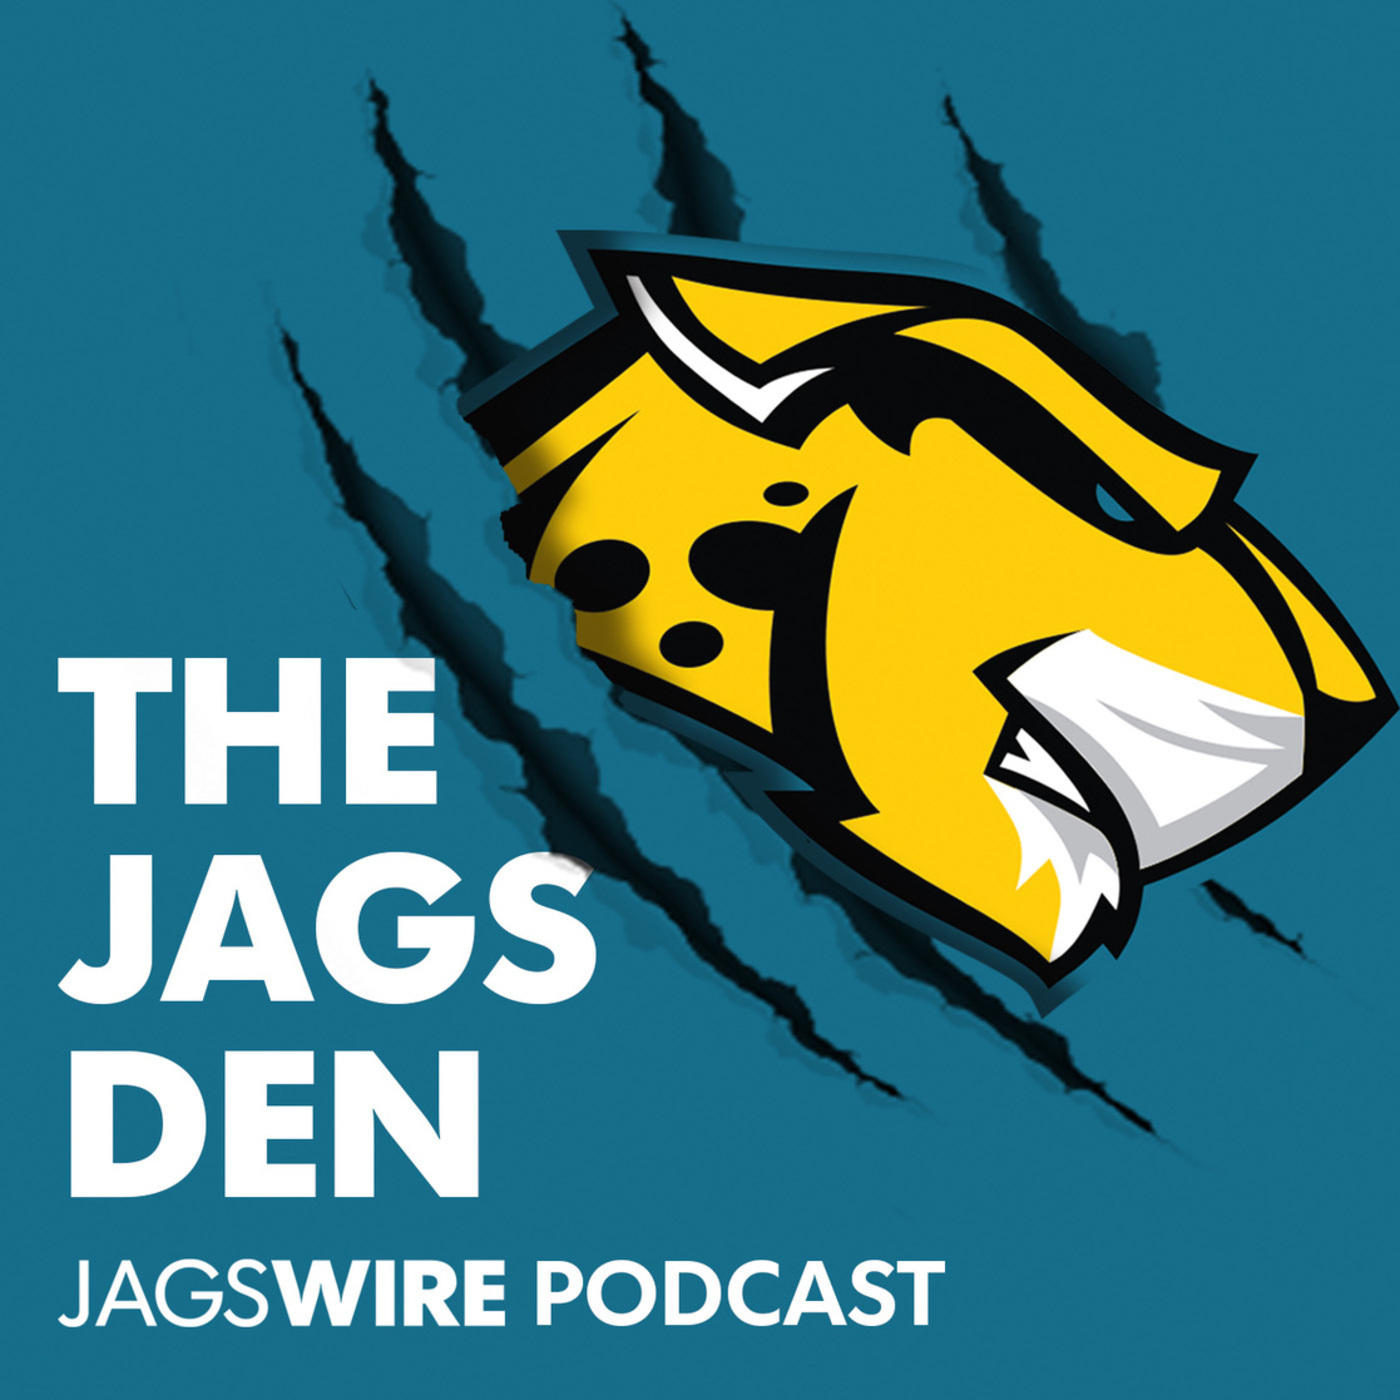 Jags Den Podcast Ep. 35: Round table discussions on DeFilippo hiring, Senior Bowl, Dante Fowler Jr. comments and Super Bowl LIII predictions  